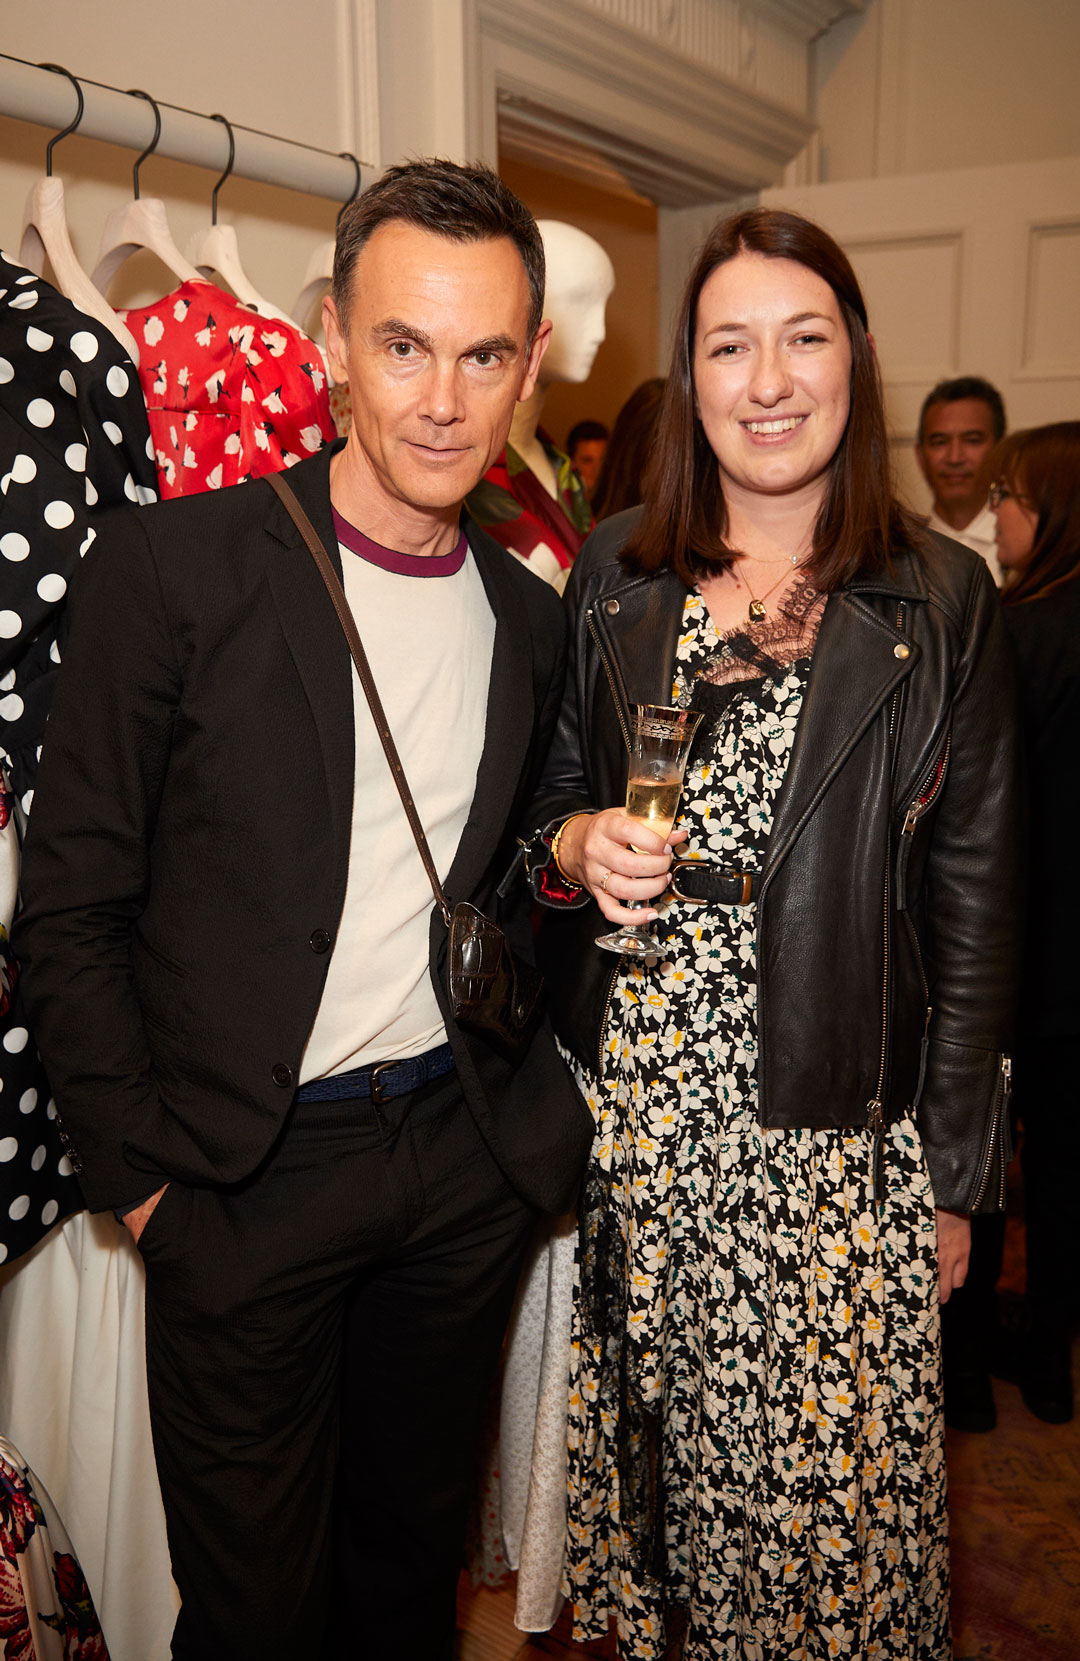 Nick Vinson and Chelsea Power at the Interiors launch at MATCHESFASHION.COM in London